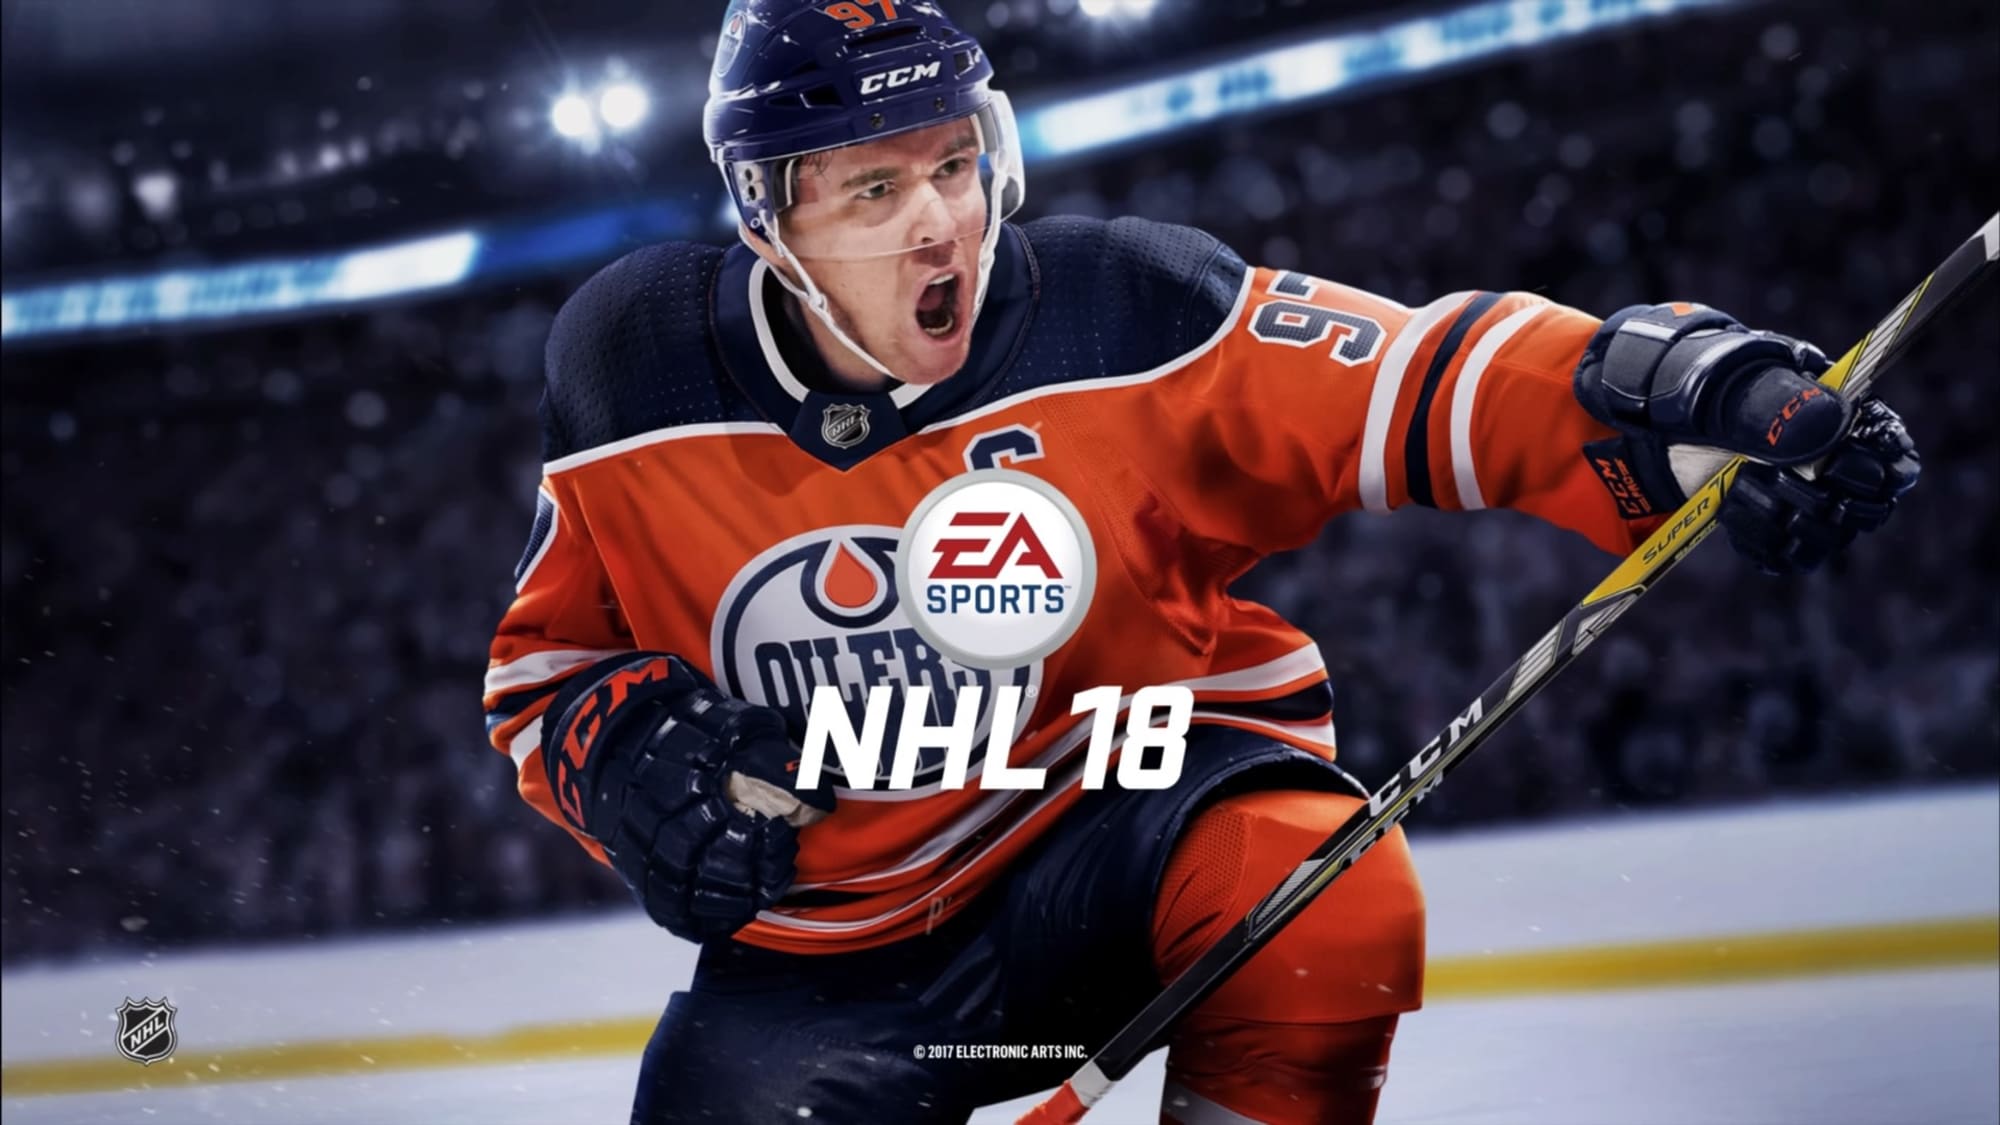 nhl 2017 review